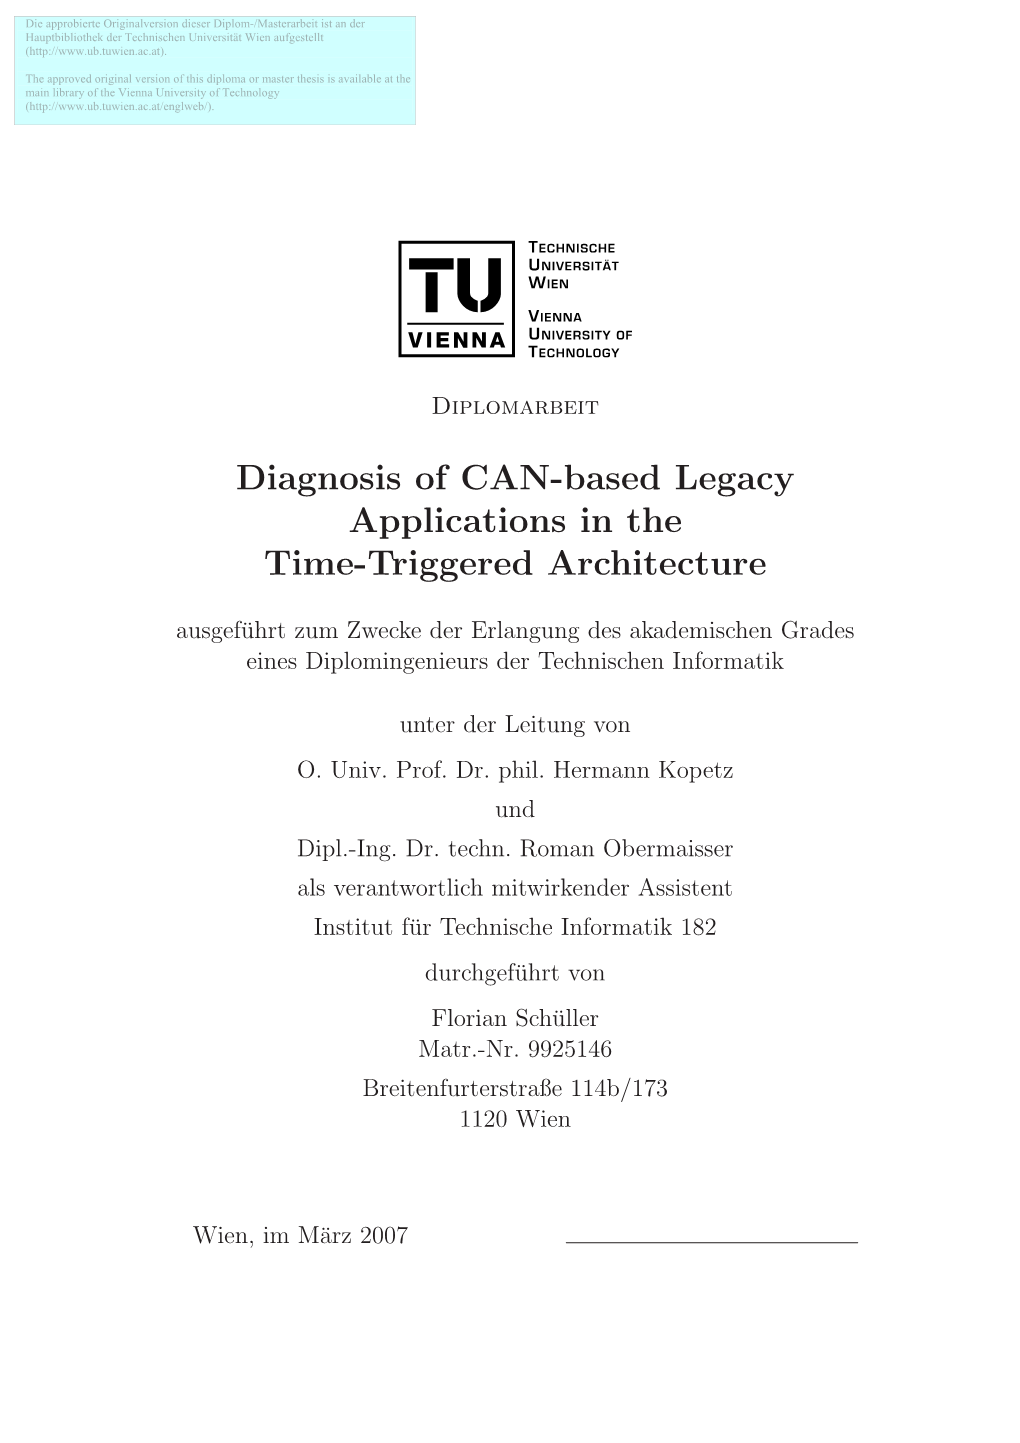 Diagnosis of CAN-Based Legacy Applications in the Time-Triggered Architecture